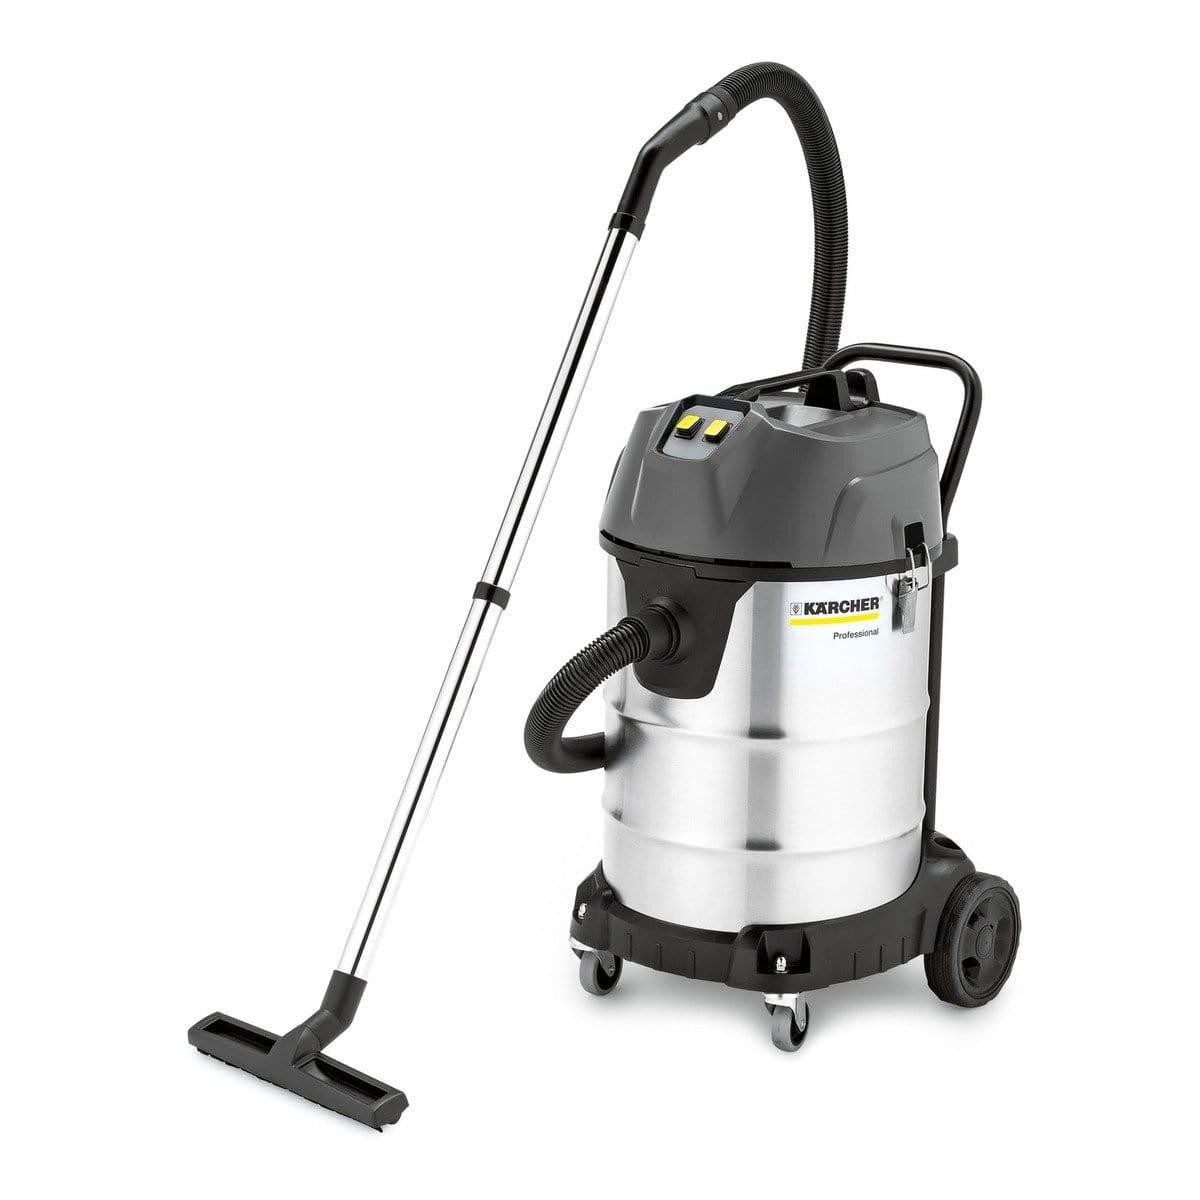 Karcher 70L Wet & Dry Vacuum Cleaner - NT 70/2 Me Classic | Supply Master | Accra, Ghana Tools Building Steel Engineering Hardware tool